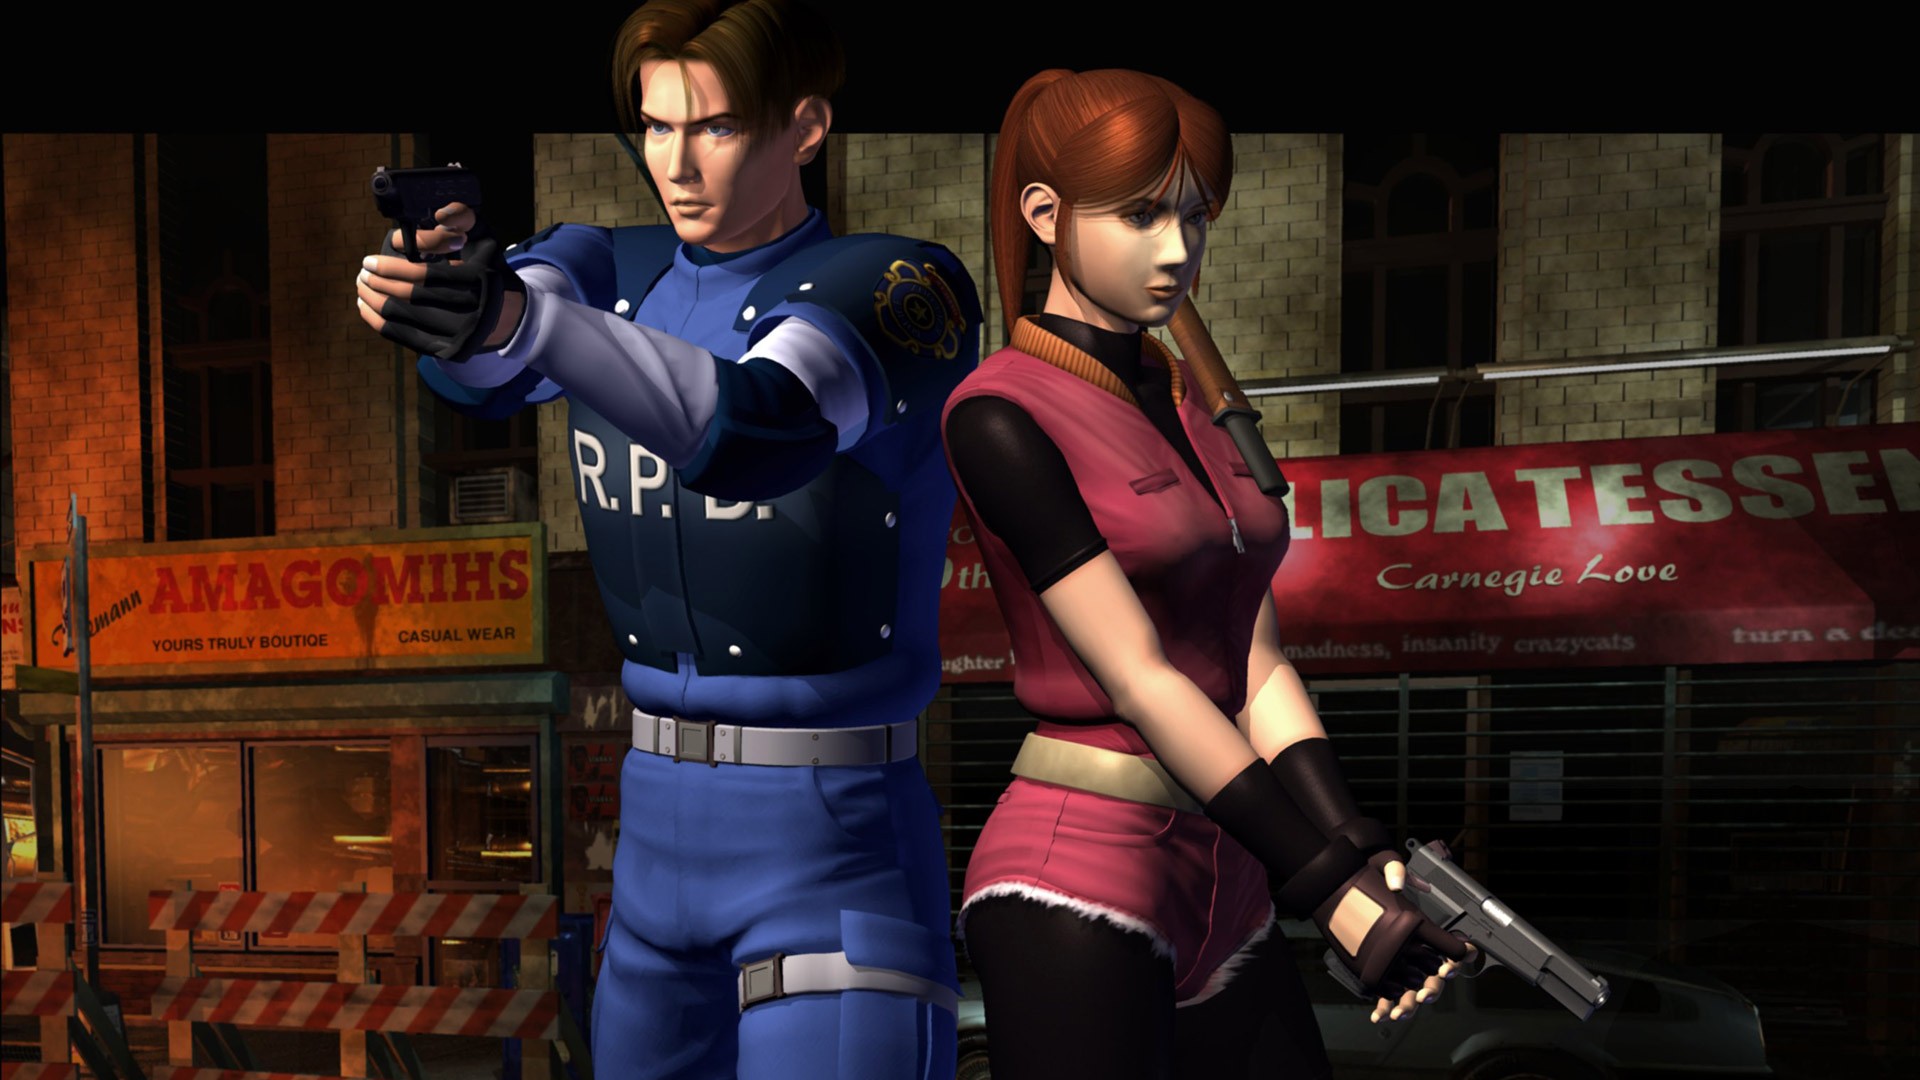 General 1920x1080 Resident Evil 2 Resident Evil Leon S. Kennedy Claire Redfield video games Leon Kennedy Video Game Horror video game girls video game men gun girls with guns redhead video game characters